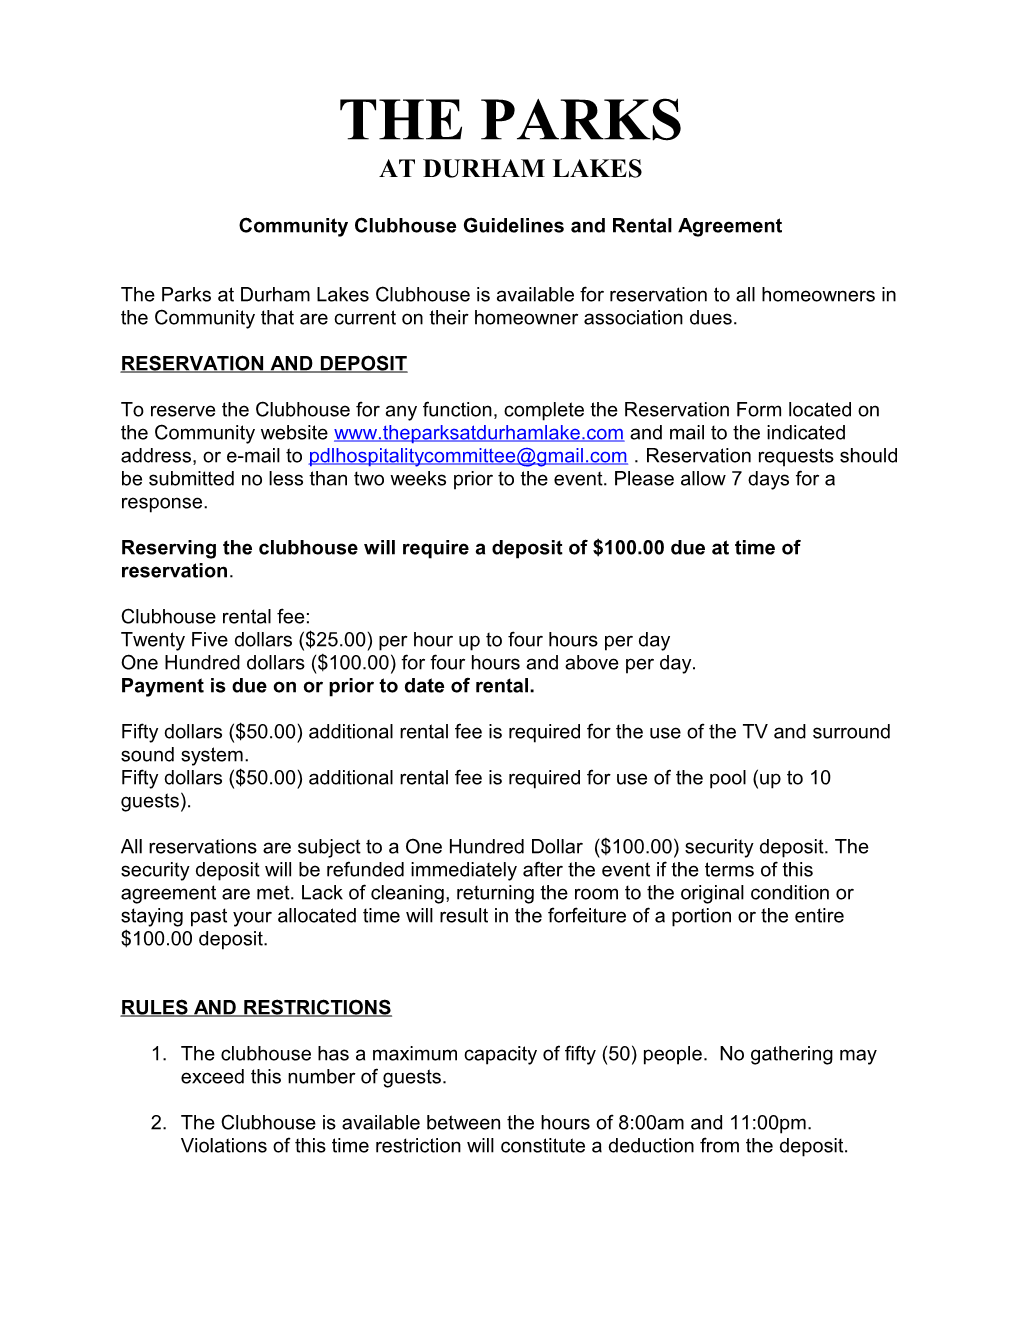 Community Clubhouse Guidelinesand Rental Agreement